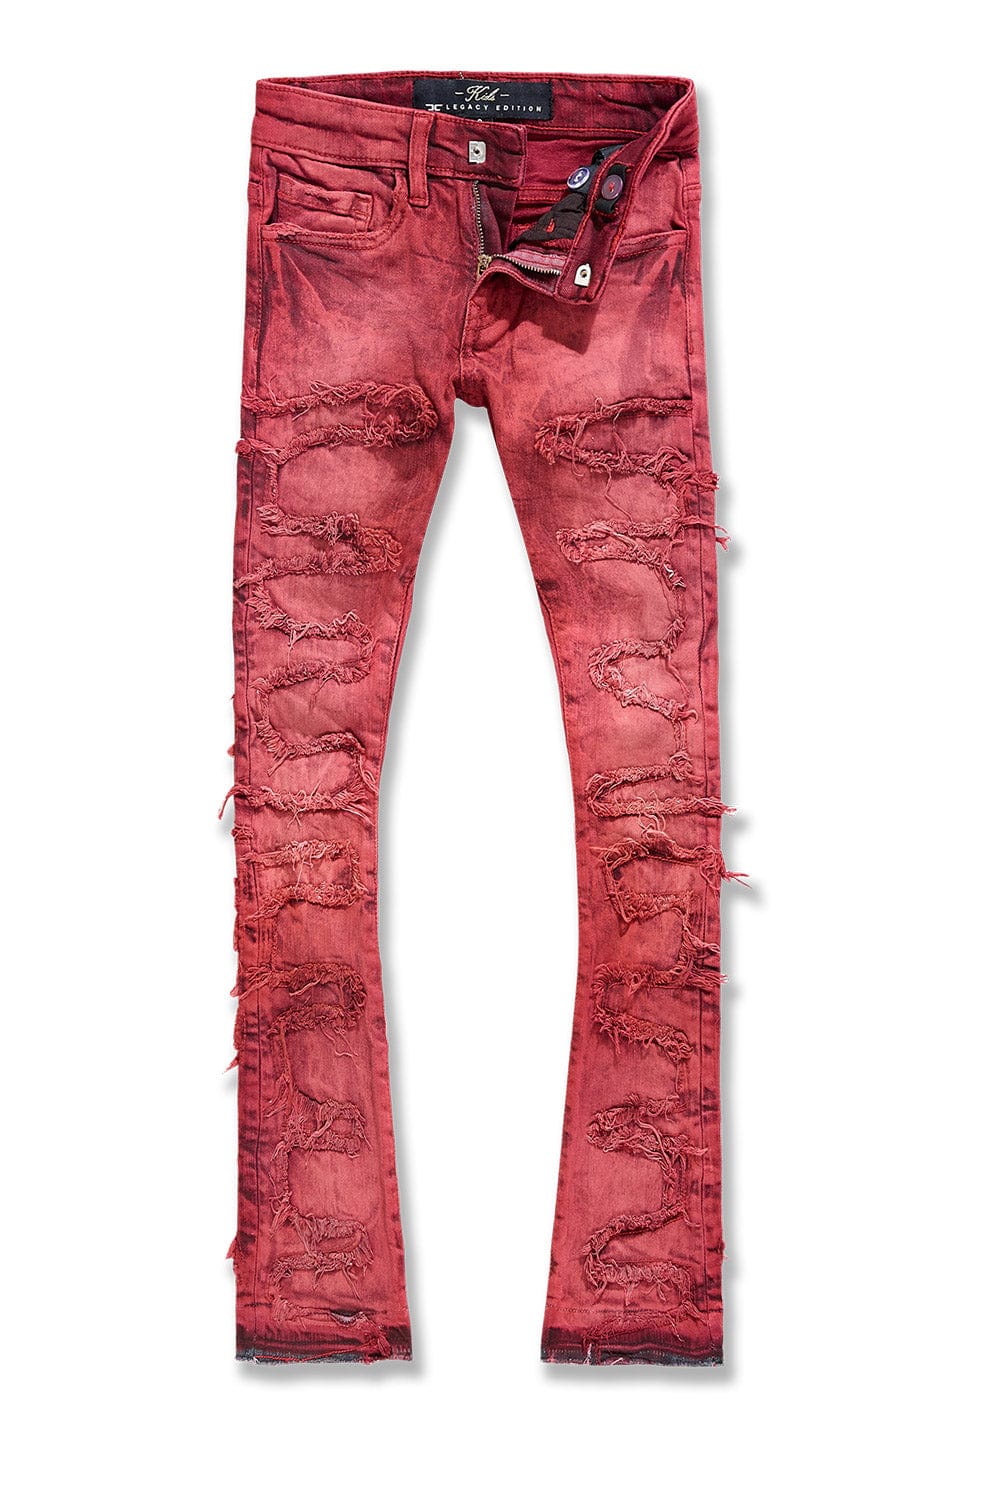 Kids Stacked Oasis Denim Jeans - Red